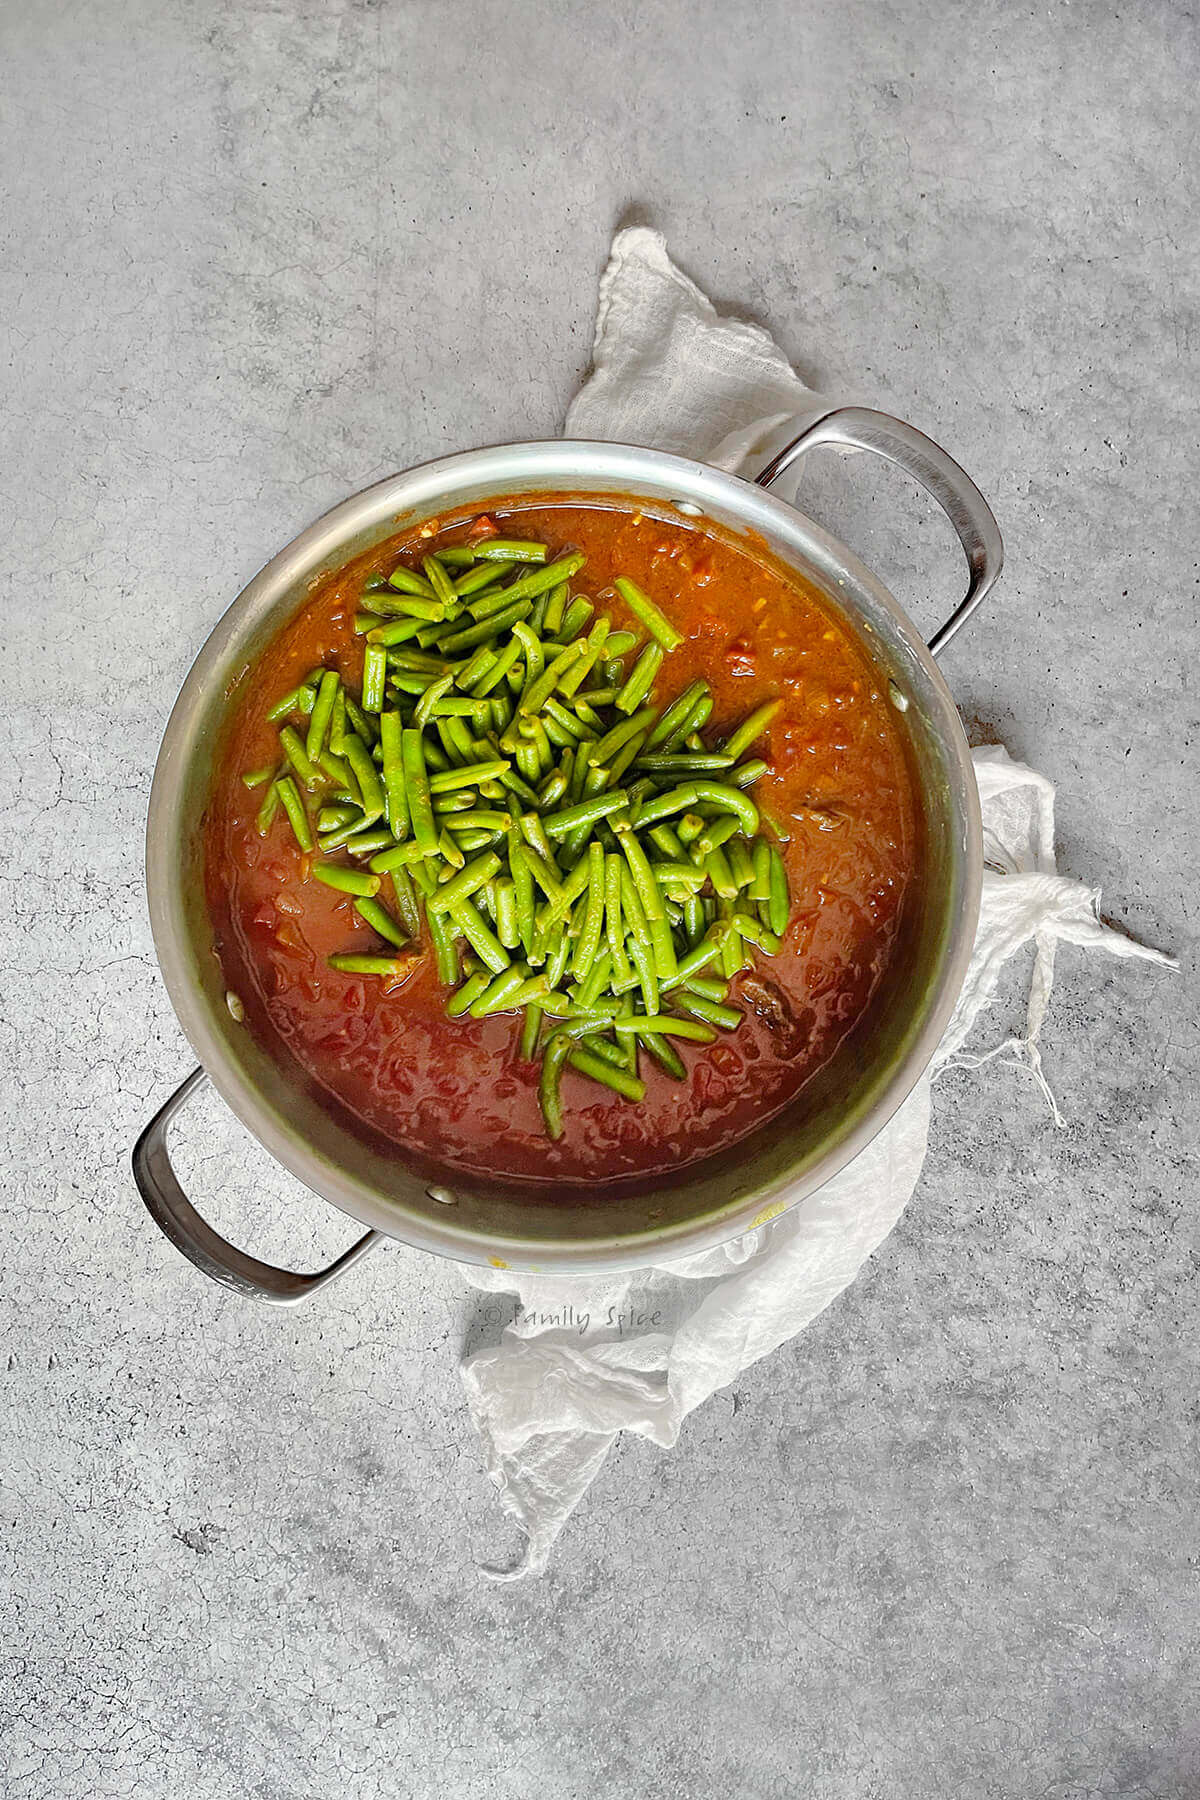 Adding chopped green beans to tomato-beef stew meat simmering in a stainless pot